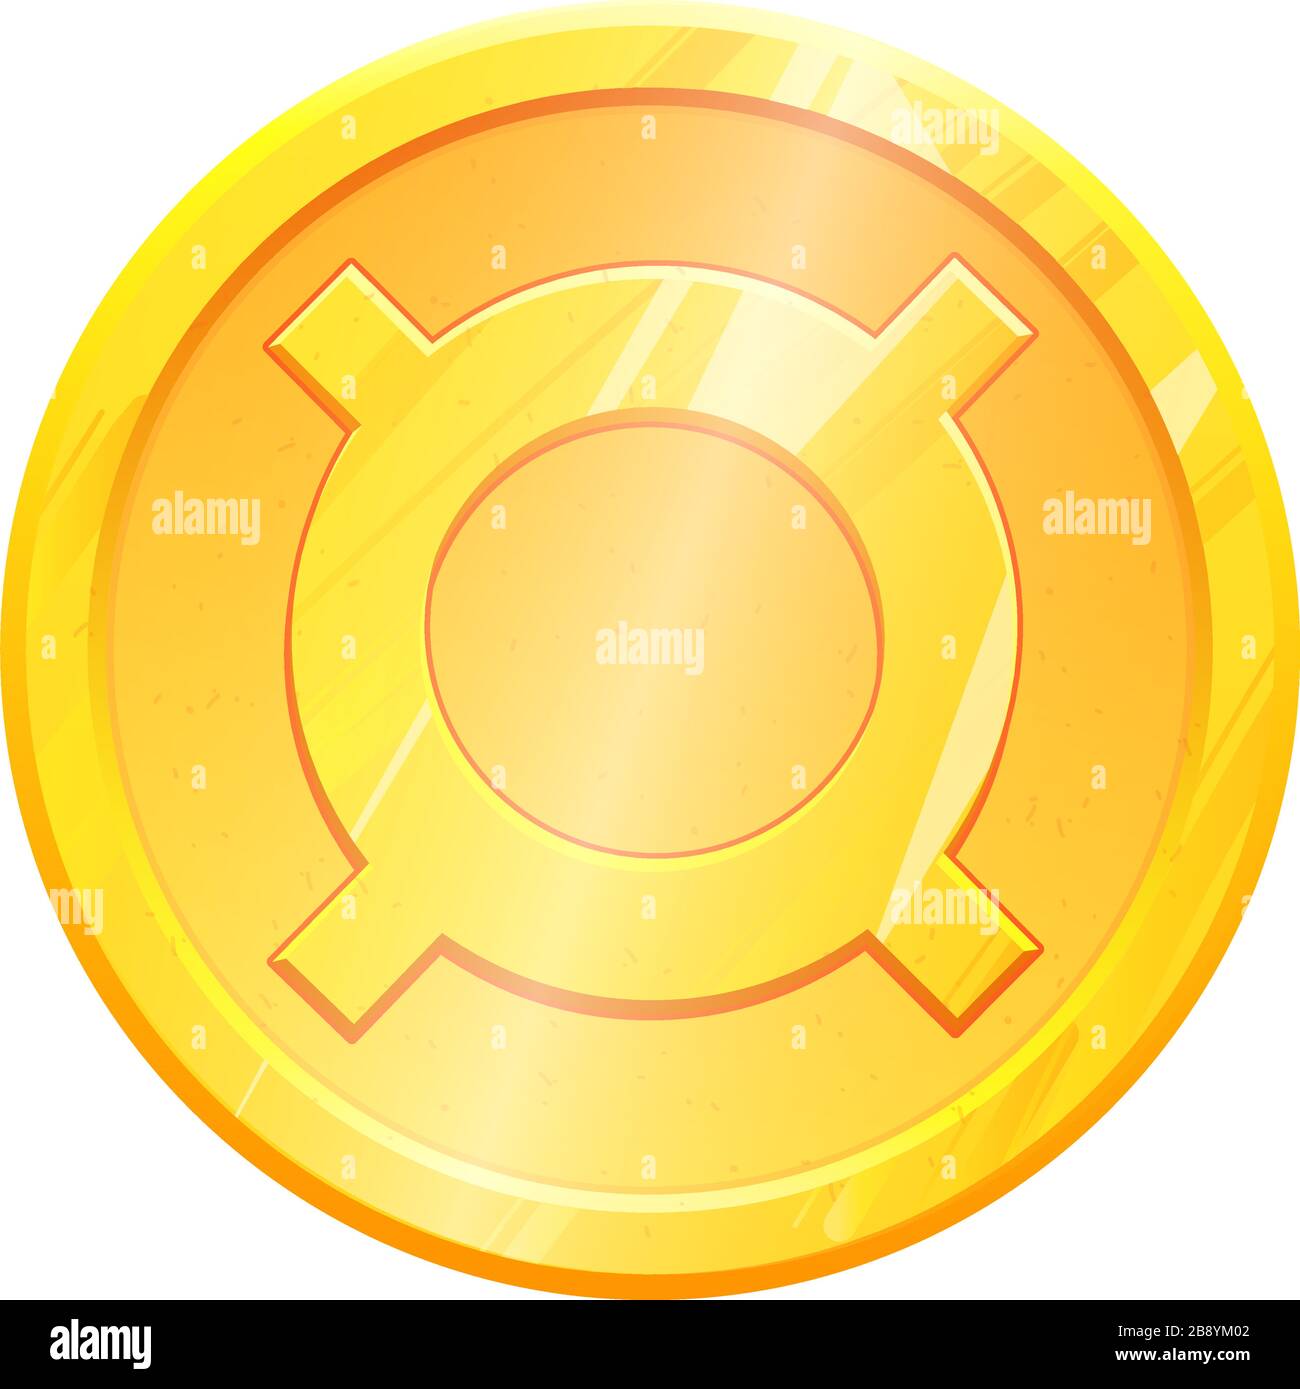 Golden coin generic currency icon symbol on white background. Finance investment concept. Exchange Money banking illustration. Business income earnings. Financial sign stock vector. Stock Vector